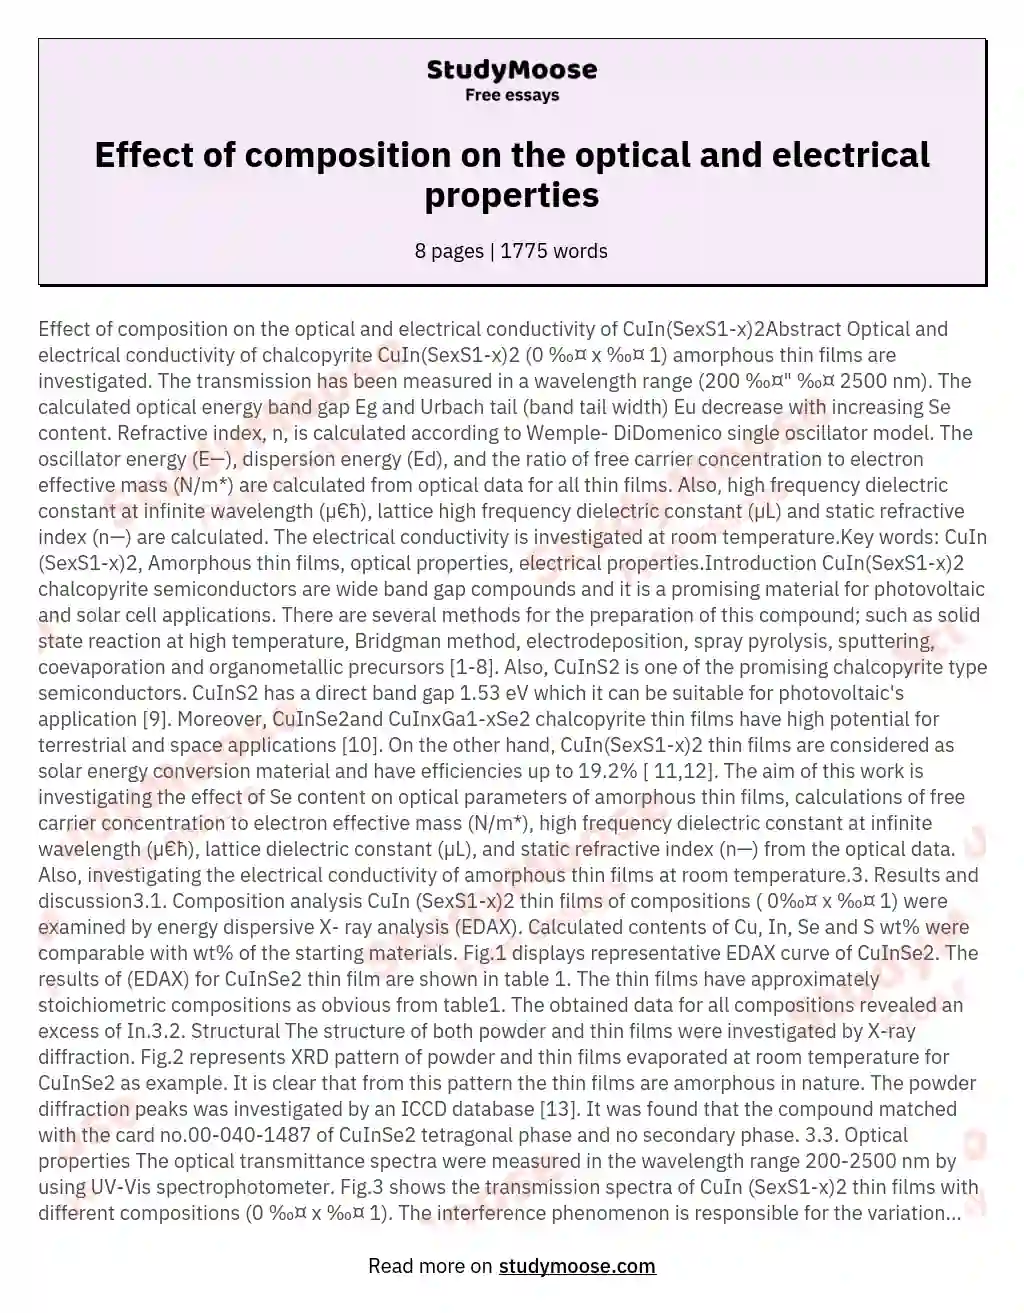 Effect of composition on the optical and electrical properties essay